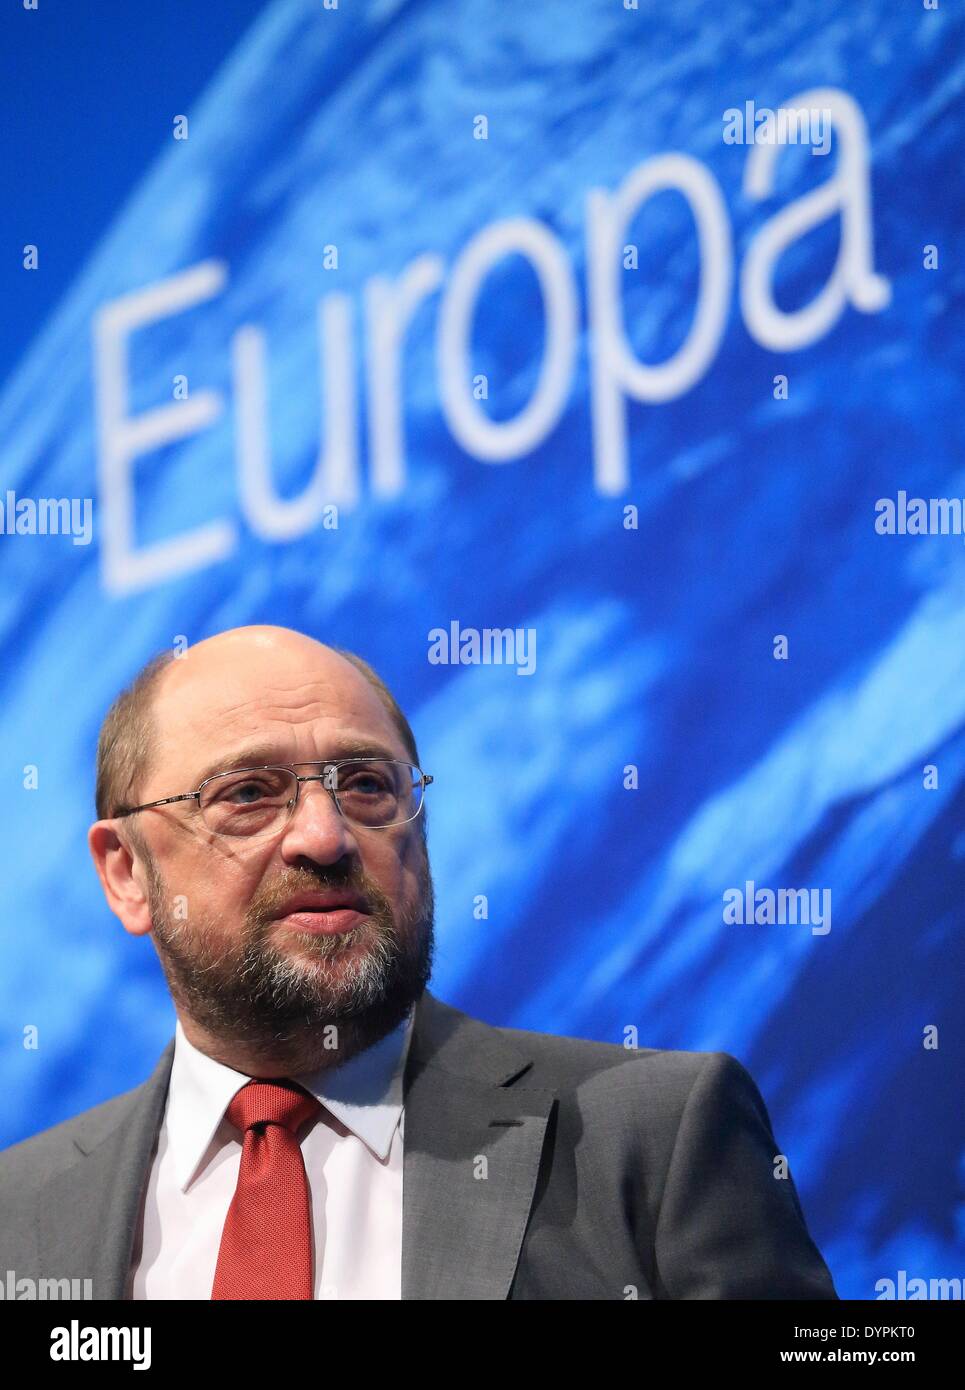 Madgeburg, Germany. 23rd Apr, 2014. Martin Schulz (SPD), President of the European Parliament and top candidate for the EU Social Democratic Pary, speaks during an election campaign event at the Kulturwerk Fichte in Madgeburg, Germany, 23 April 2014. The EU elections for the European Parliament take place on 25 May 2014. Photo: JENS WOLF/dpa/Alamy Live News Stock Photo